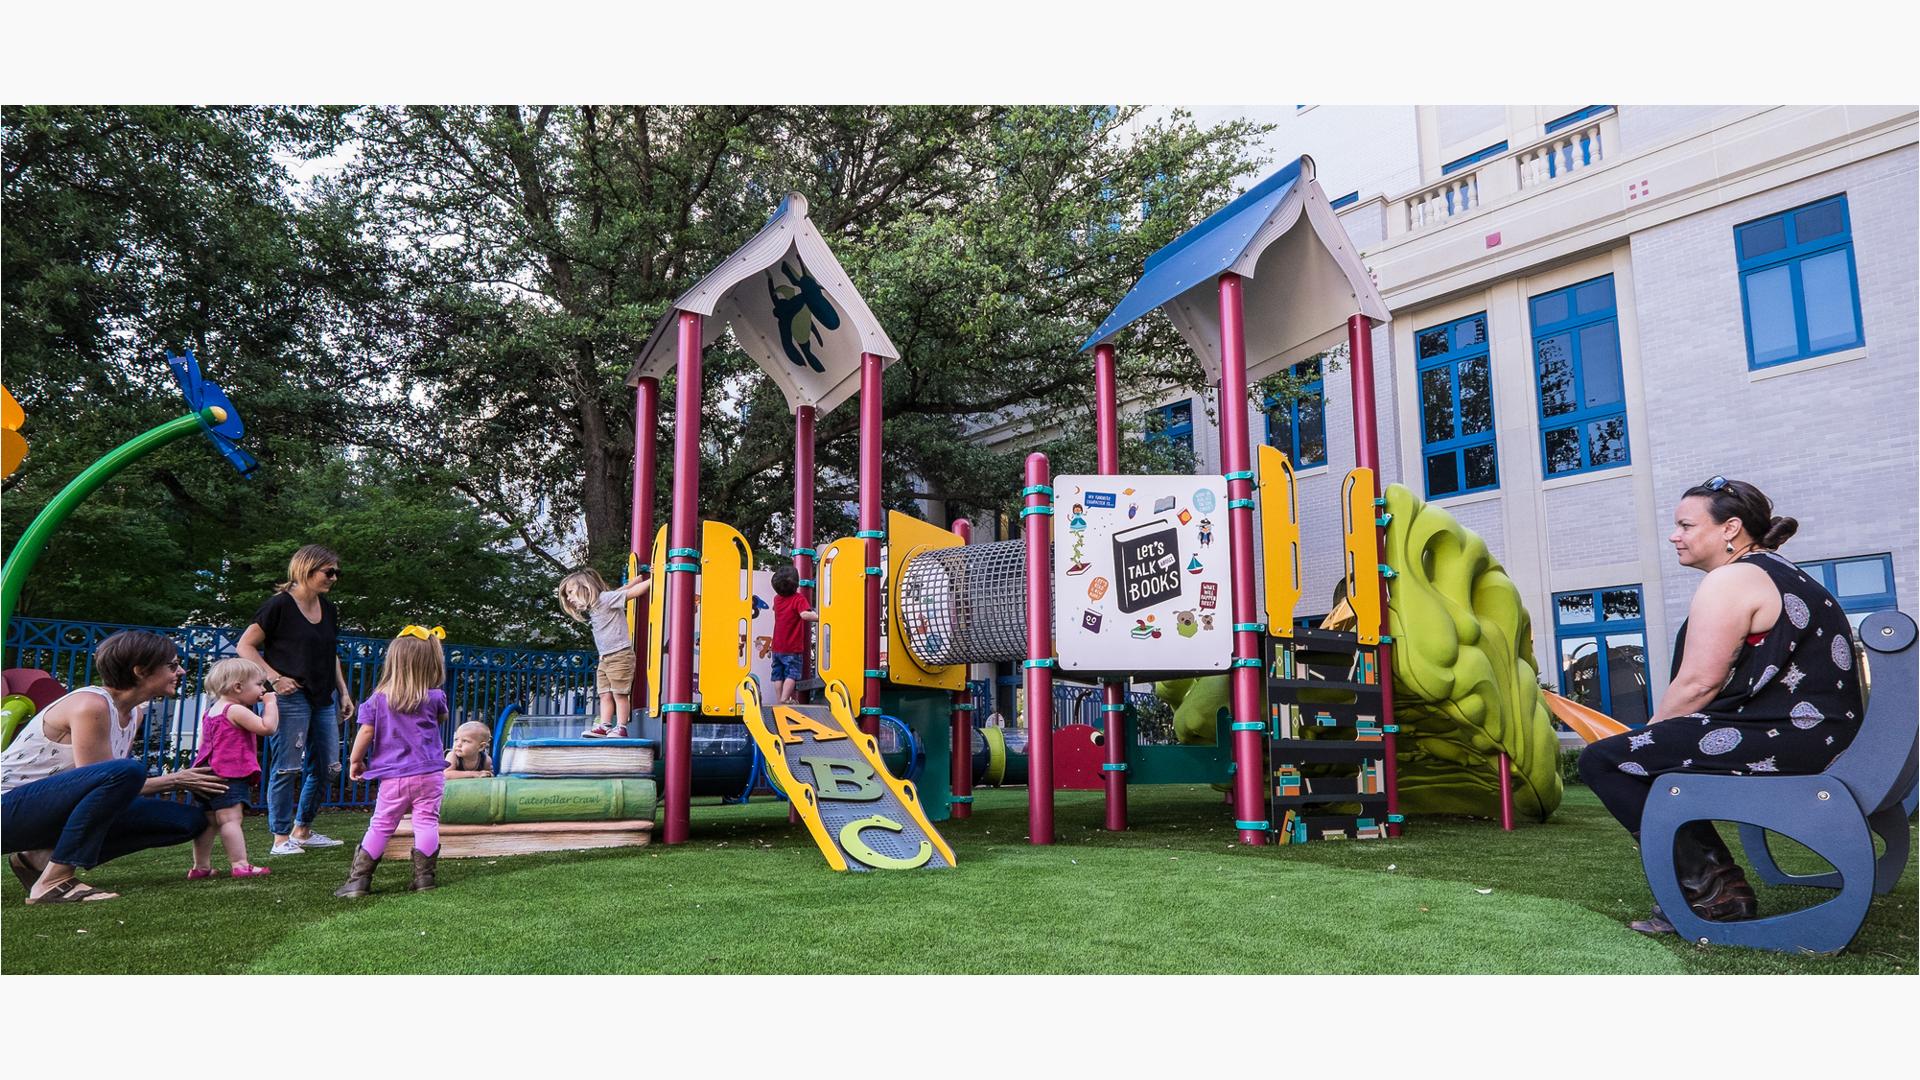 Cook Children’s Medical Center in Fort Worth, Texas, brings the joy of play and reading together in a custom, storybook-themed playground for children ages 2 to 12. Children can climb the storybook staircase or the alphabet latter.